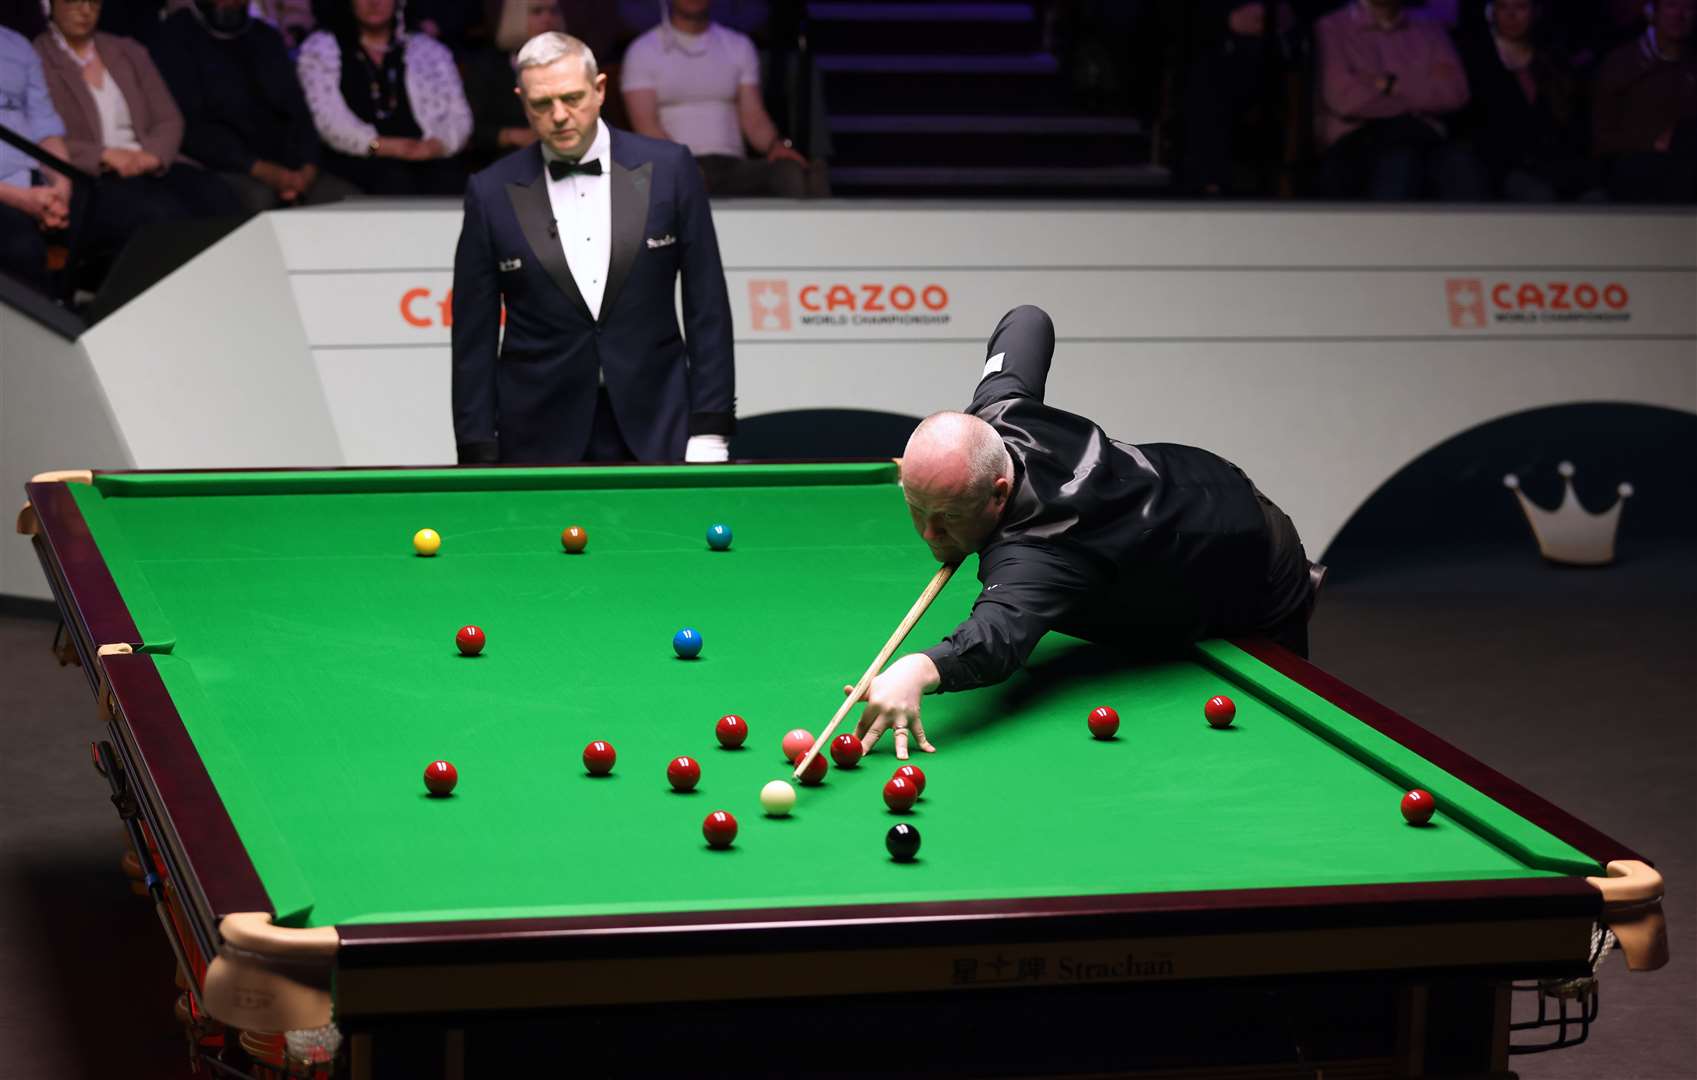 The World Snooker Championship at the Crucible Theatre in Sheffield will be paused before 3pm to allow the alert to take place (Nigel French/PA)